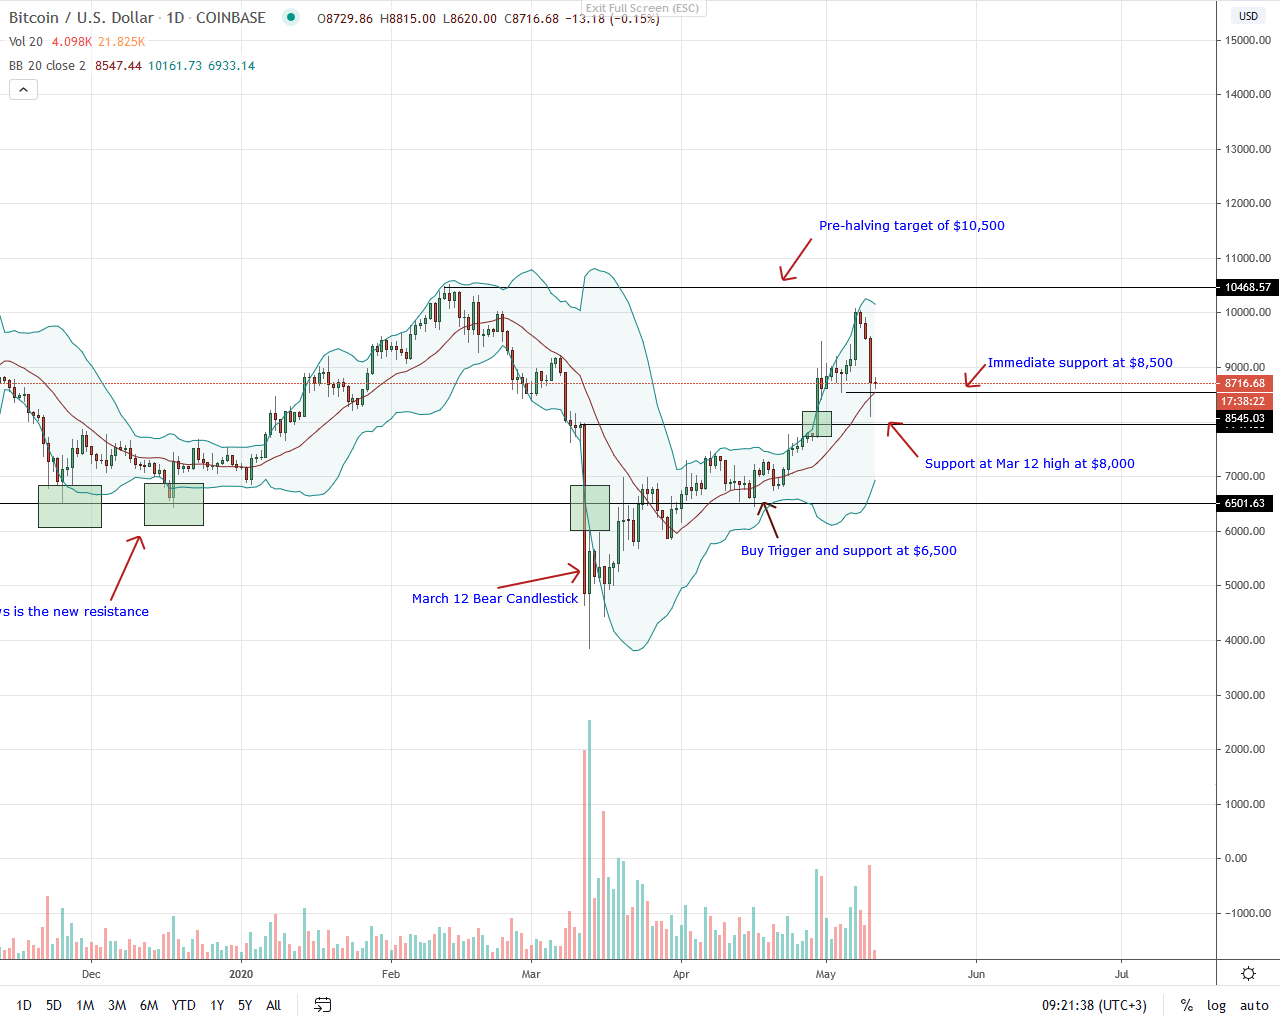 Bitcoin Daily Chart for May 11